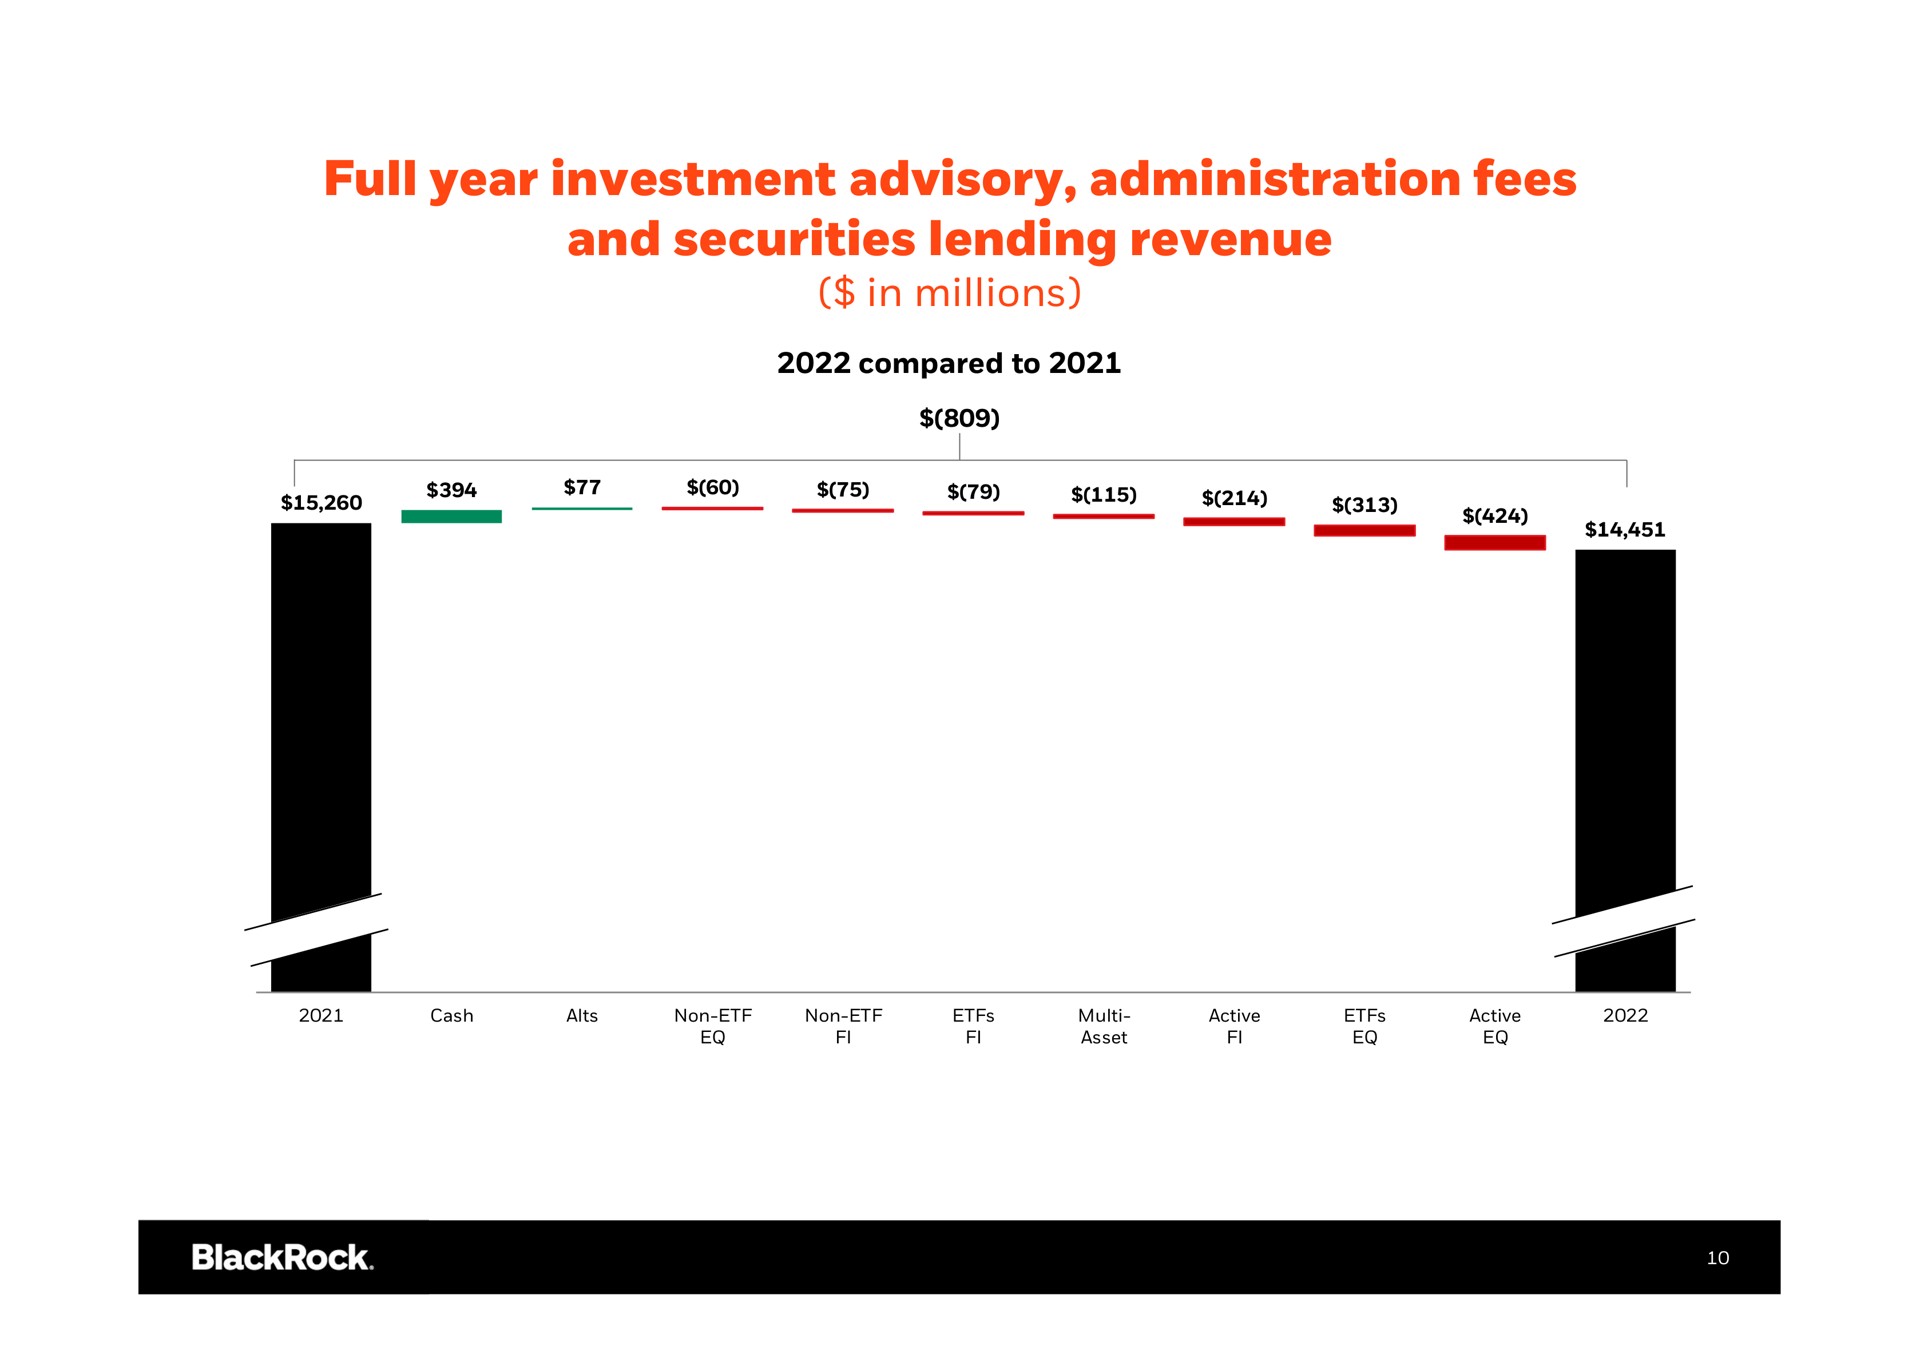 full year investment advisory administration fees and securities lending revenue in millions | BlackRock